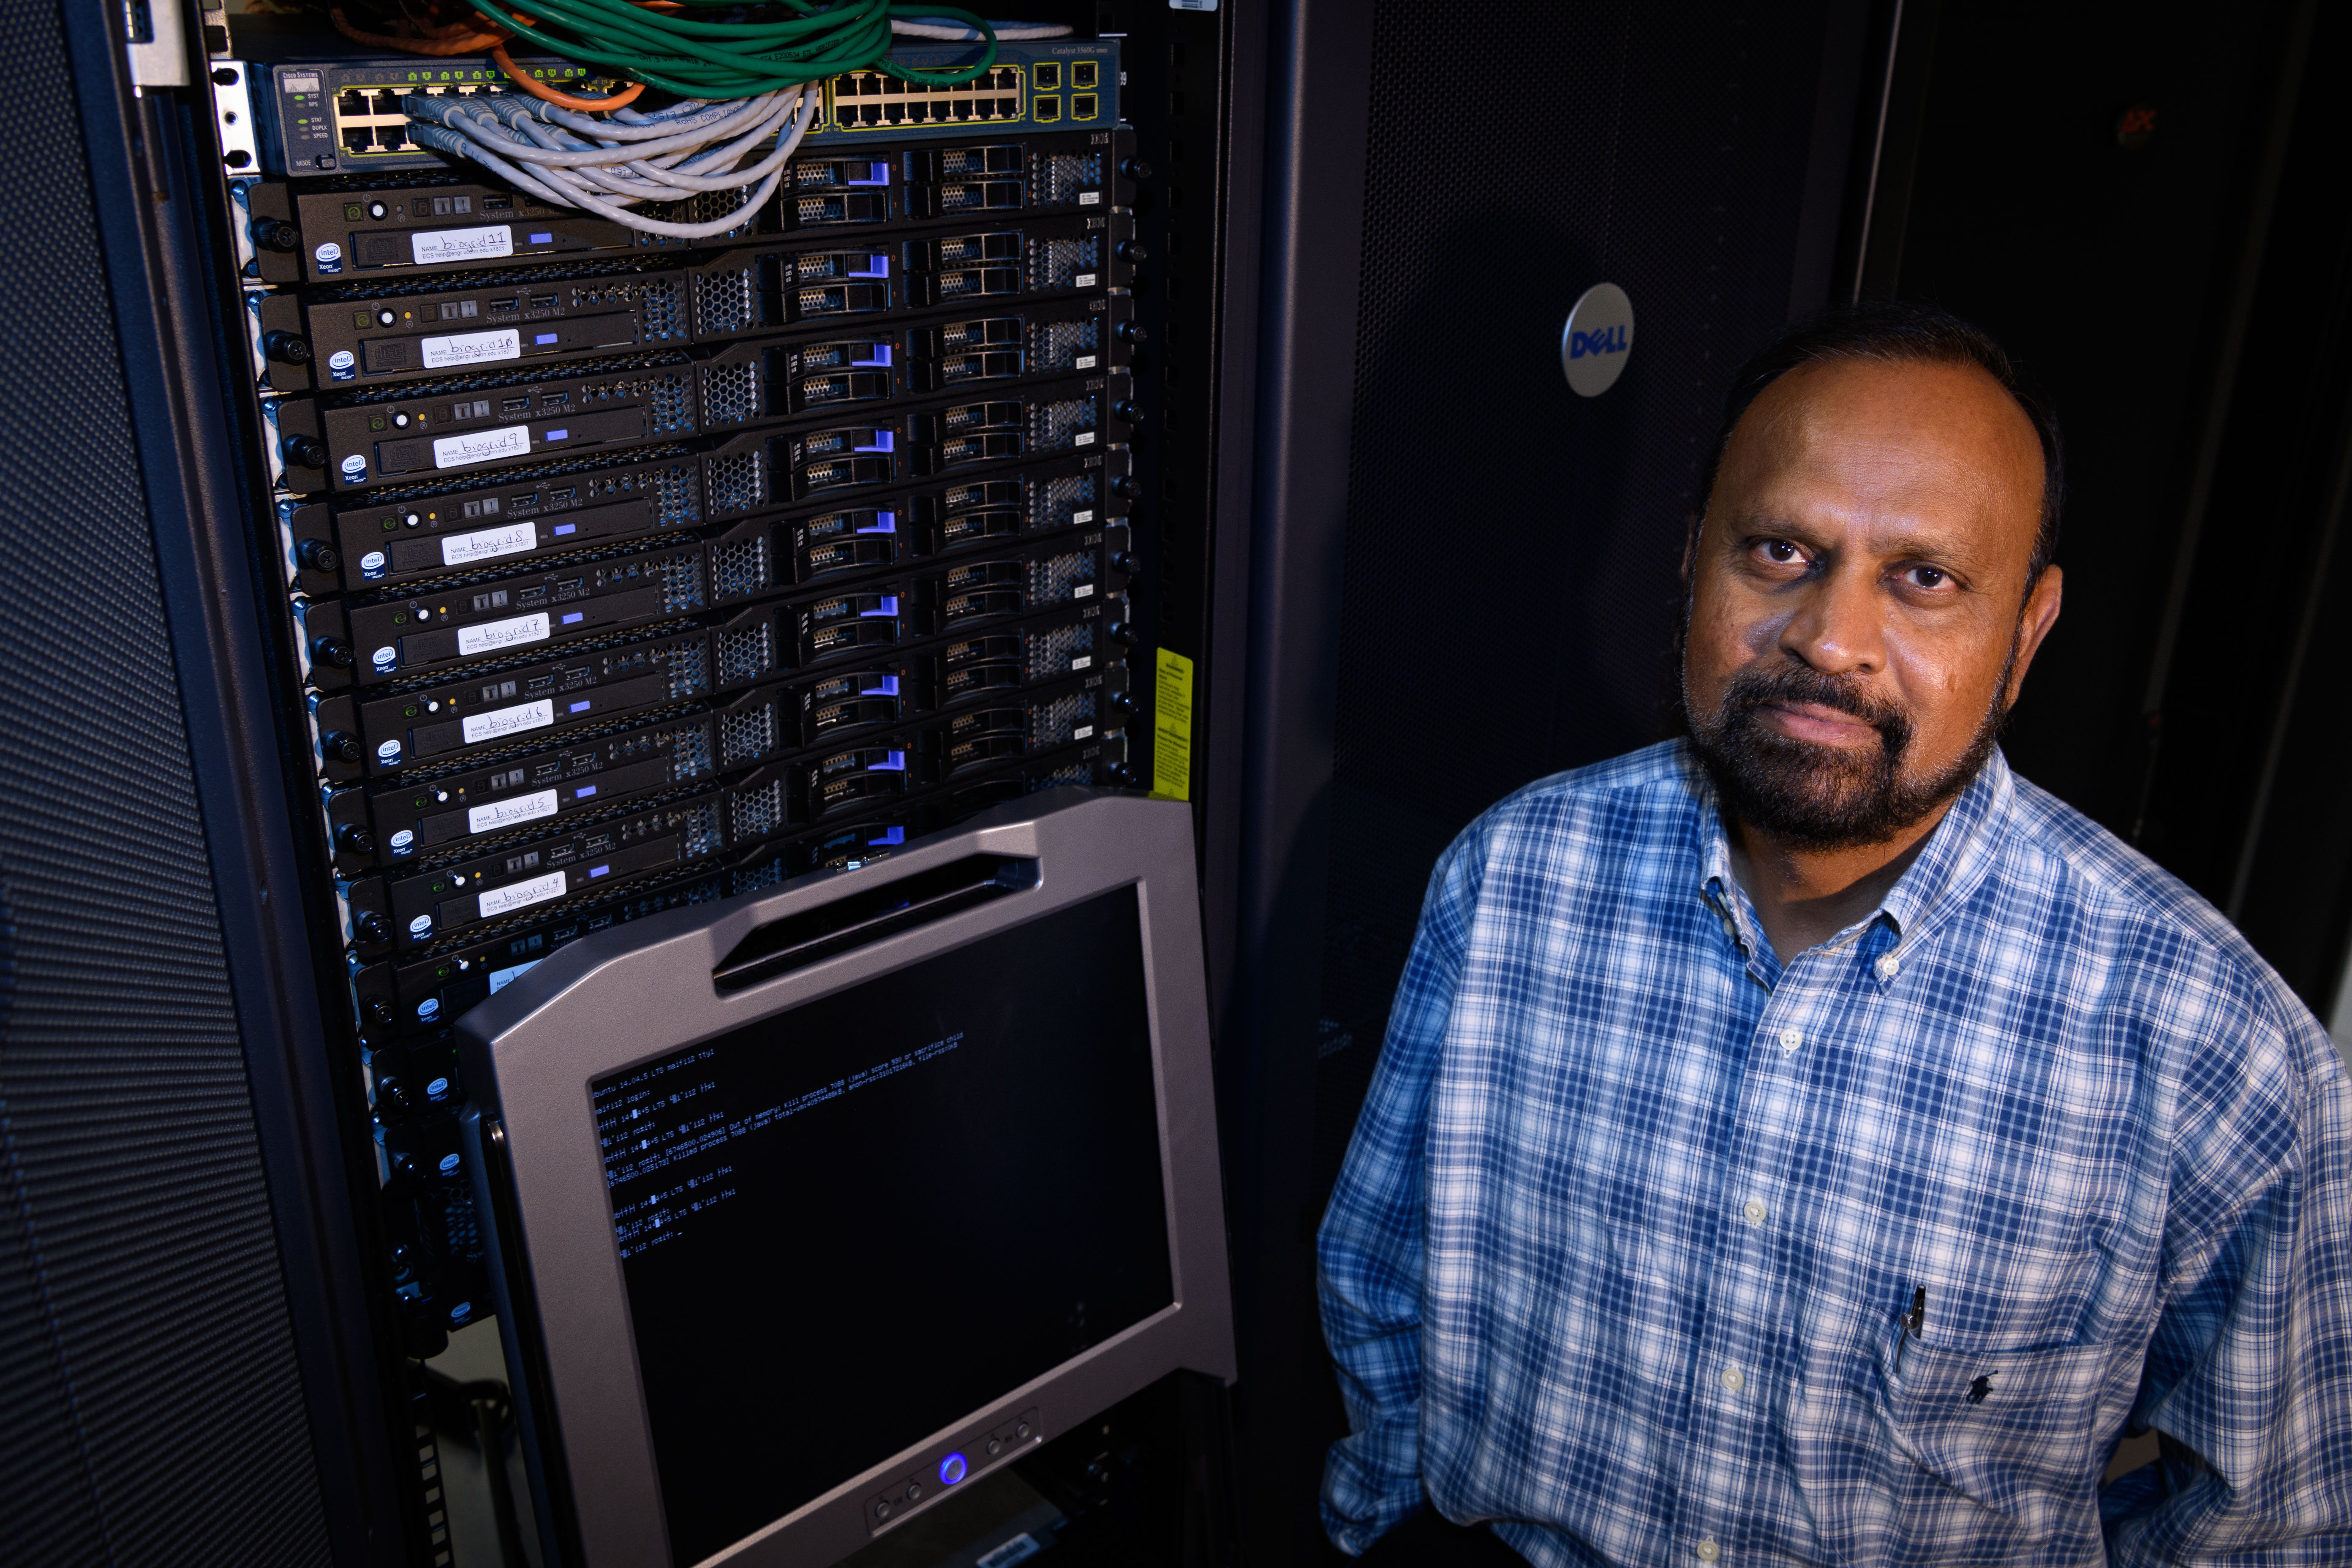 Board of Trustees Distinguished Professor of Computer Science & Engineering Sanguthevar Rajasekaran stands in front of a rack of computer servers at the Booth Engineering Center for Advanced Technology on Aug. 21, 2017. (Peter Morenus/UConn Photo)